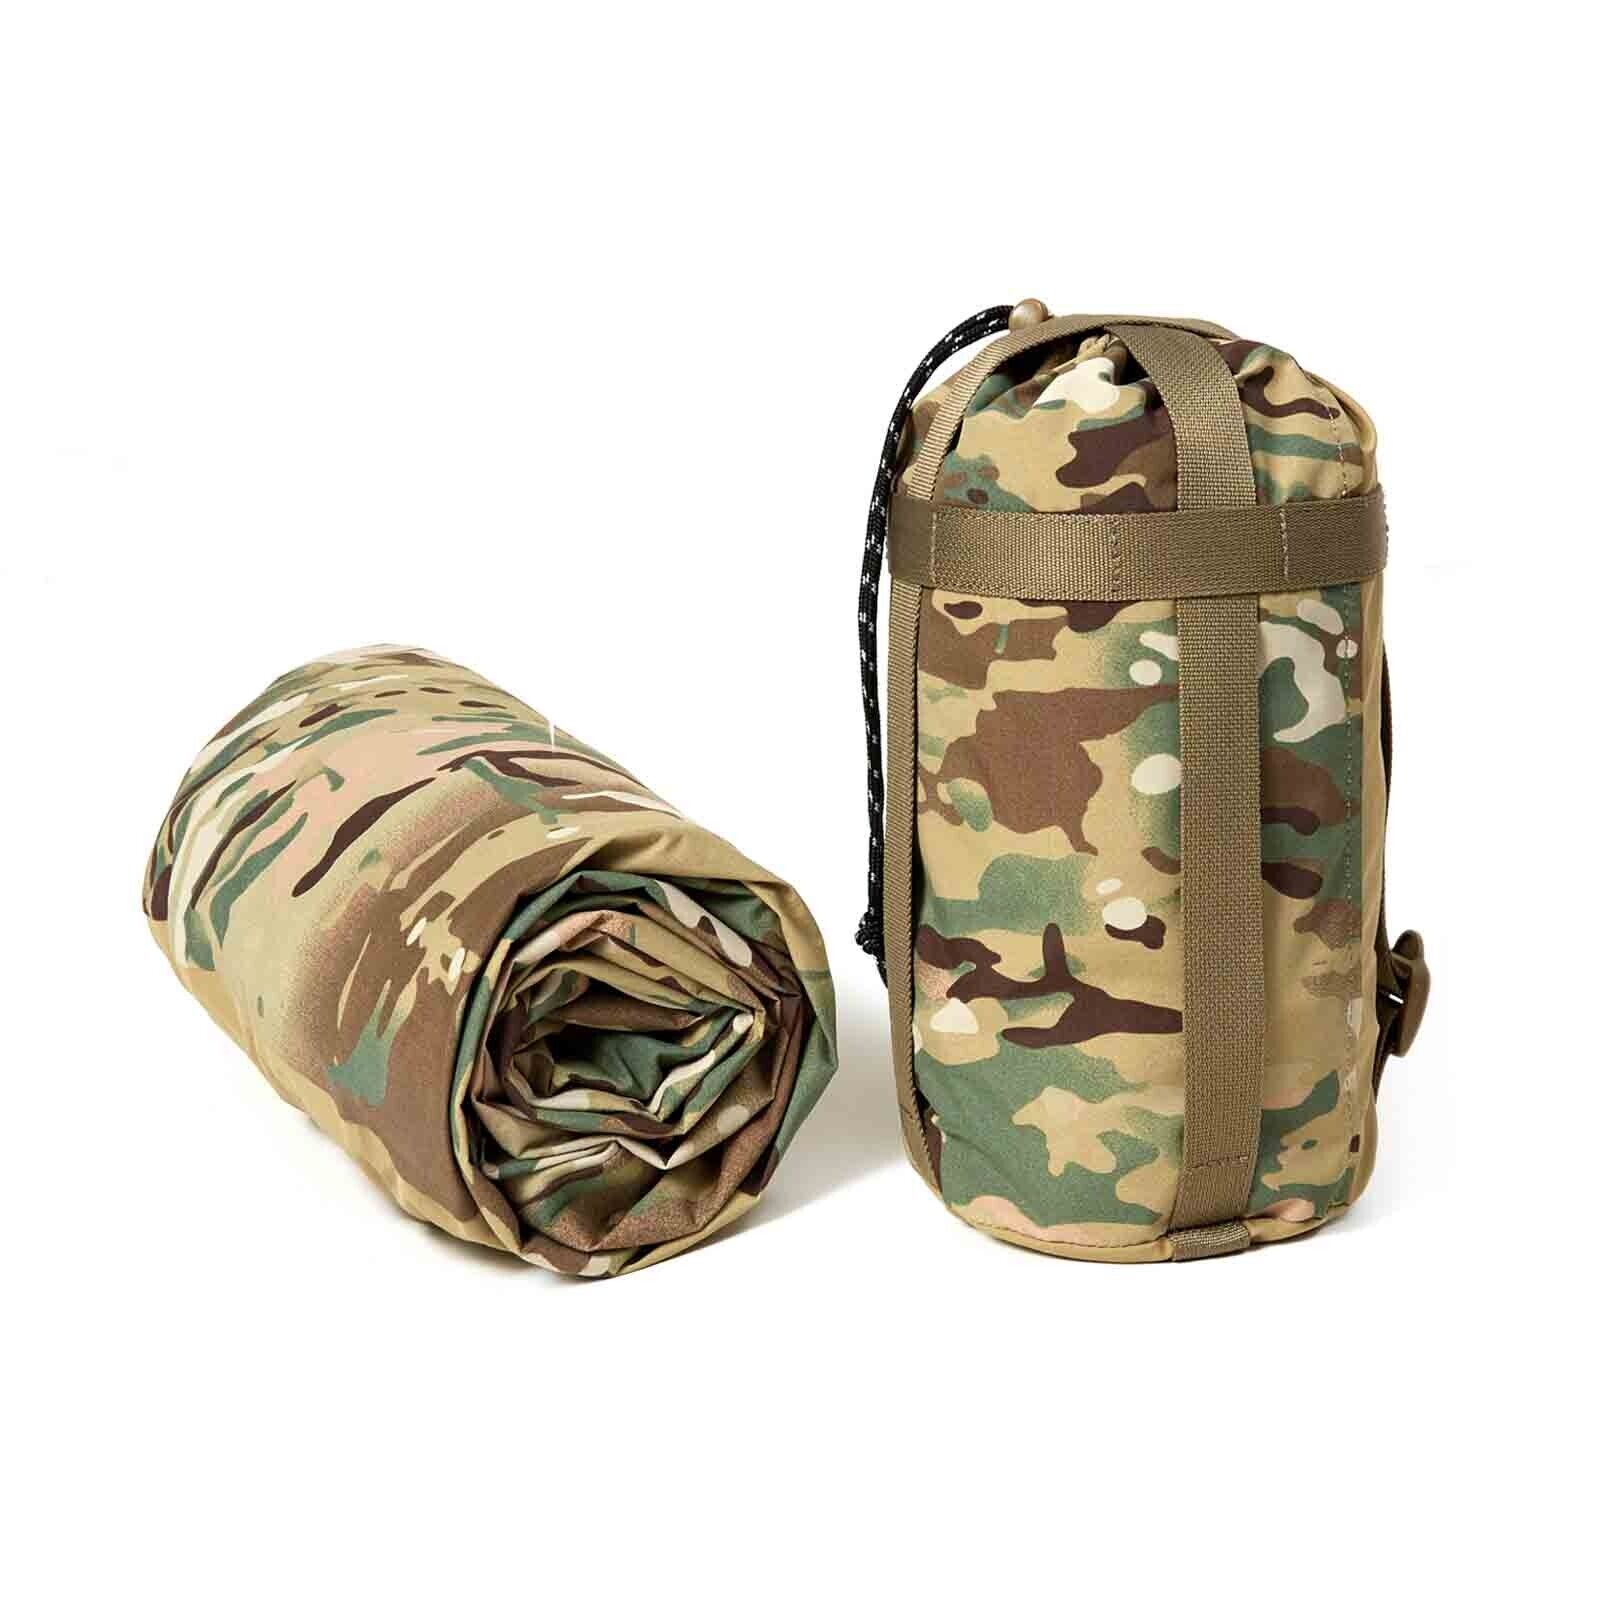 Multicam Bivy Cover Sack for Military Army Modular Sleeping Bags